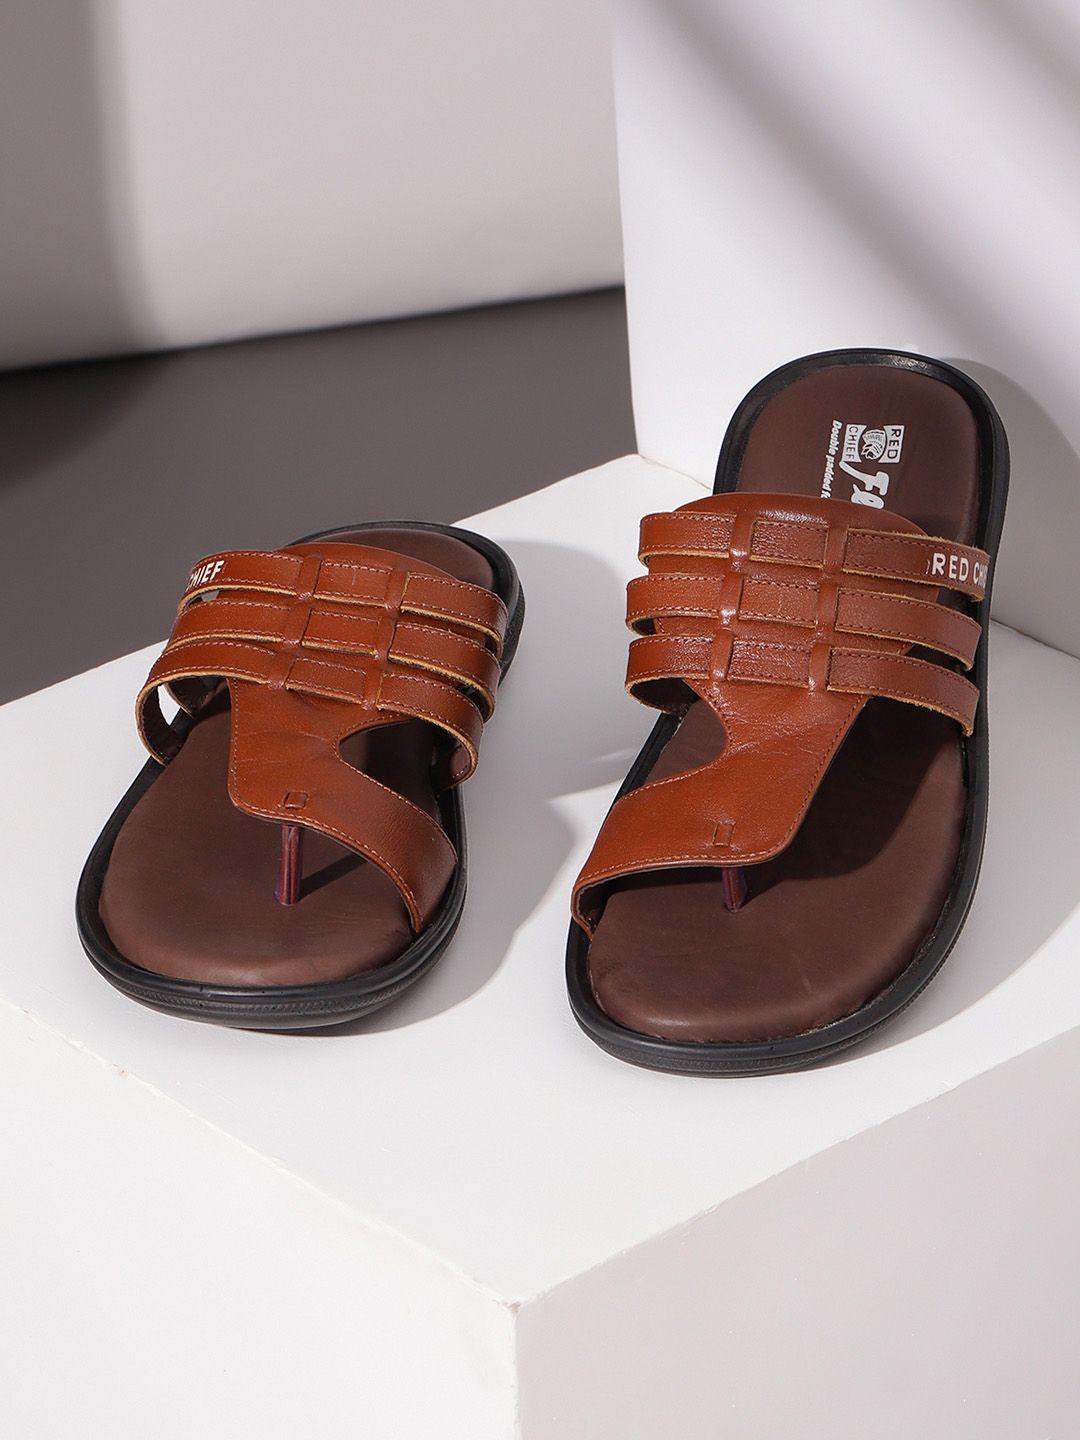 Red Chief Men Tan & Black Leather Comfort Sandals